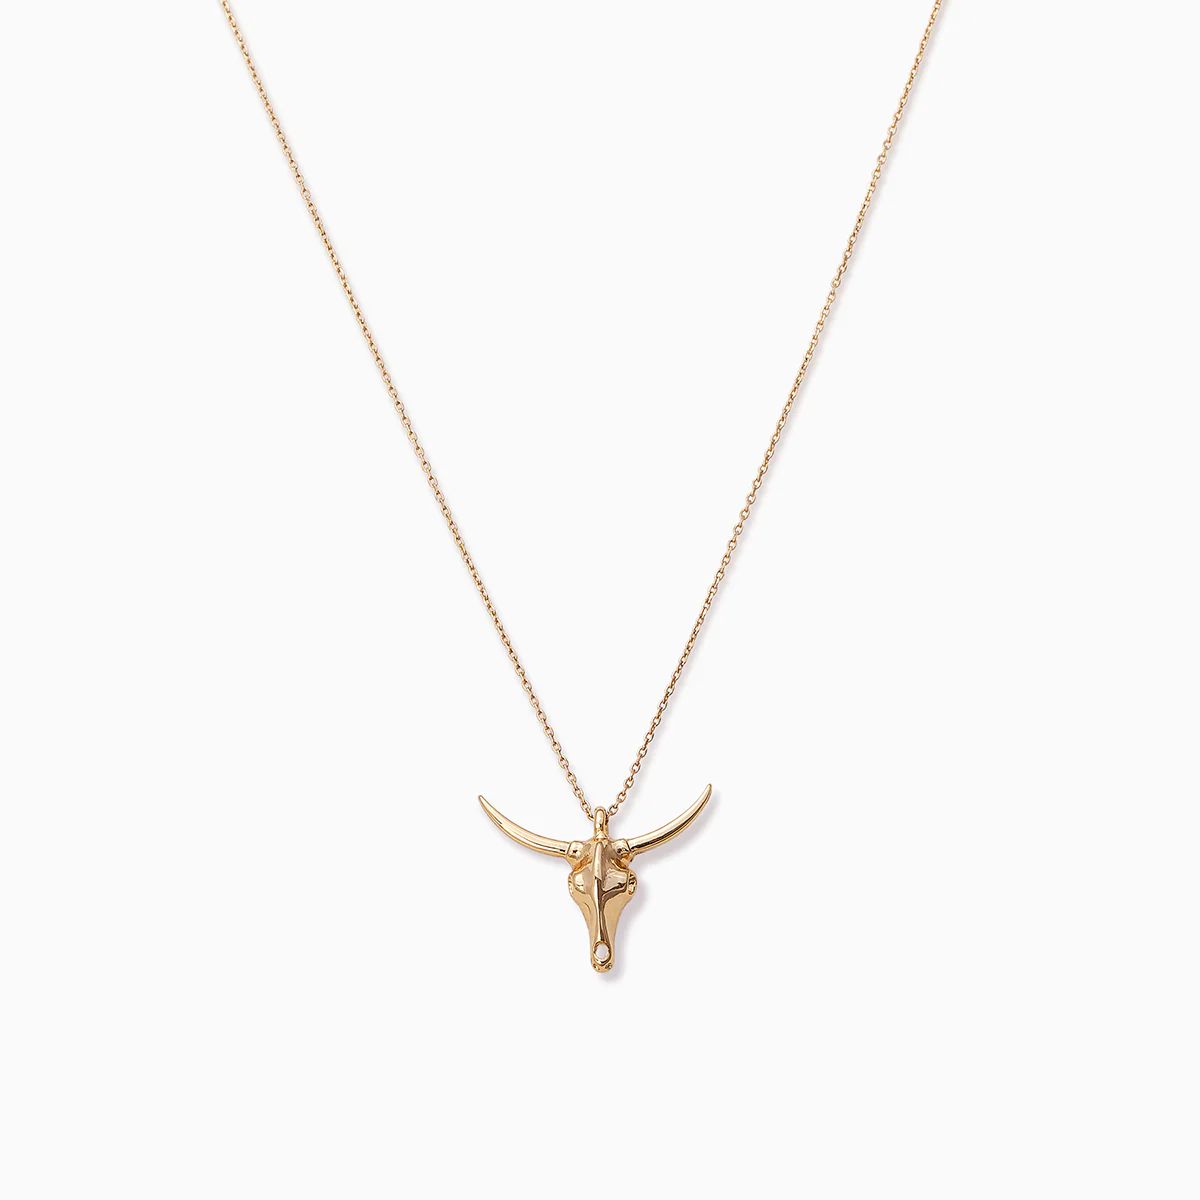 Fighter Longhorn Pendant Necklace in Gold | Uncommon James | Uncommon James